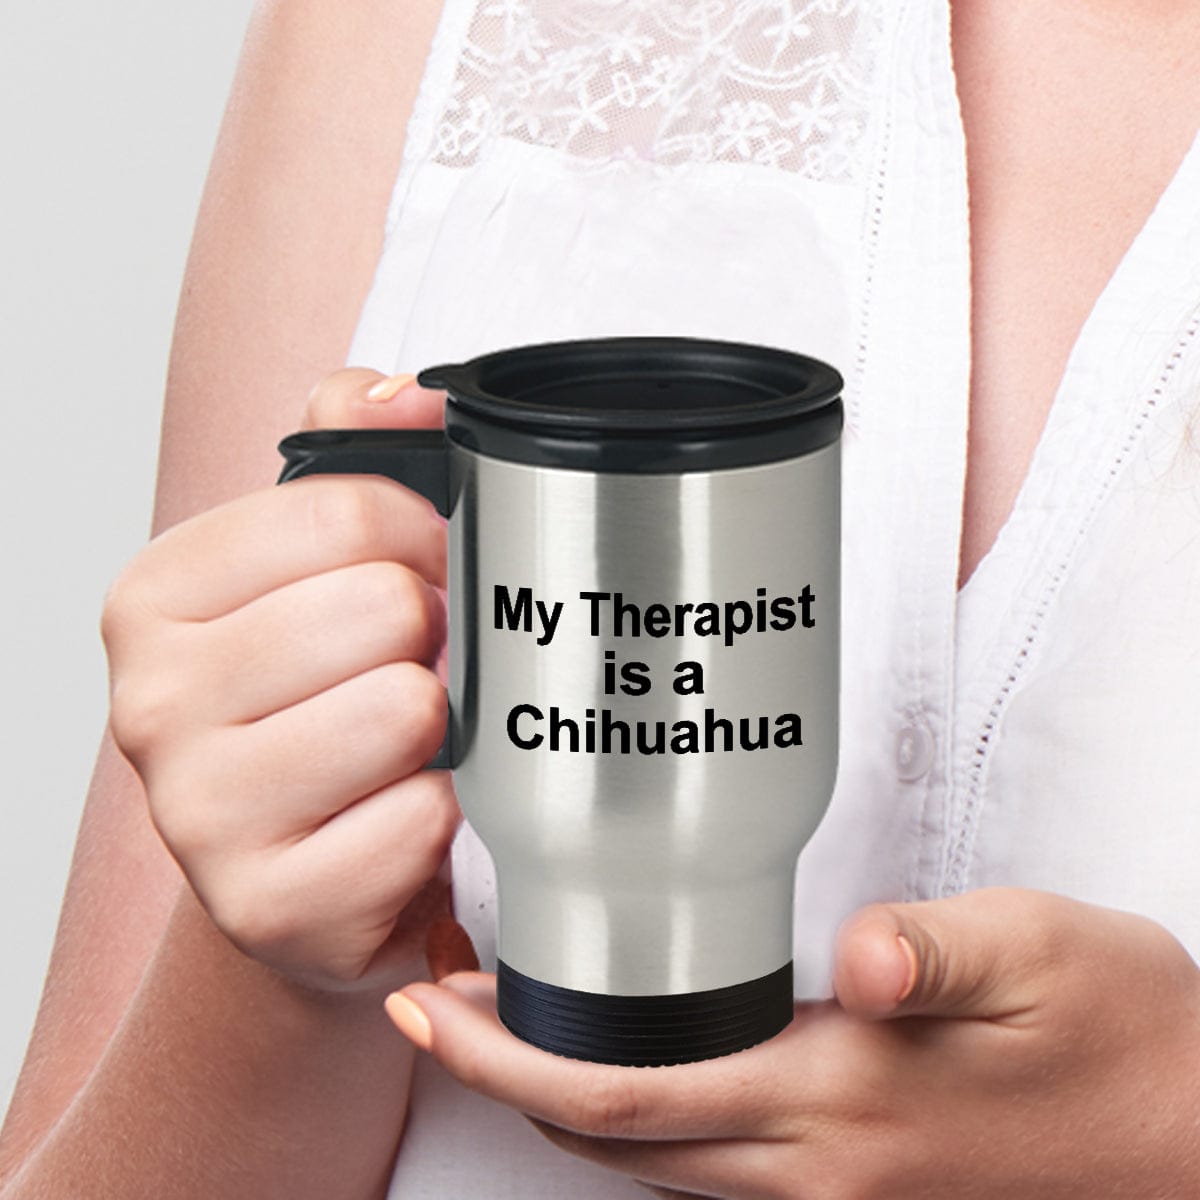 Chihuahua Dog Lover Owner Funny Gift Therapist Stainless Steel Insulated Travel Coffee Mug